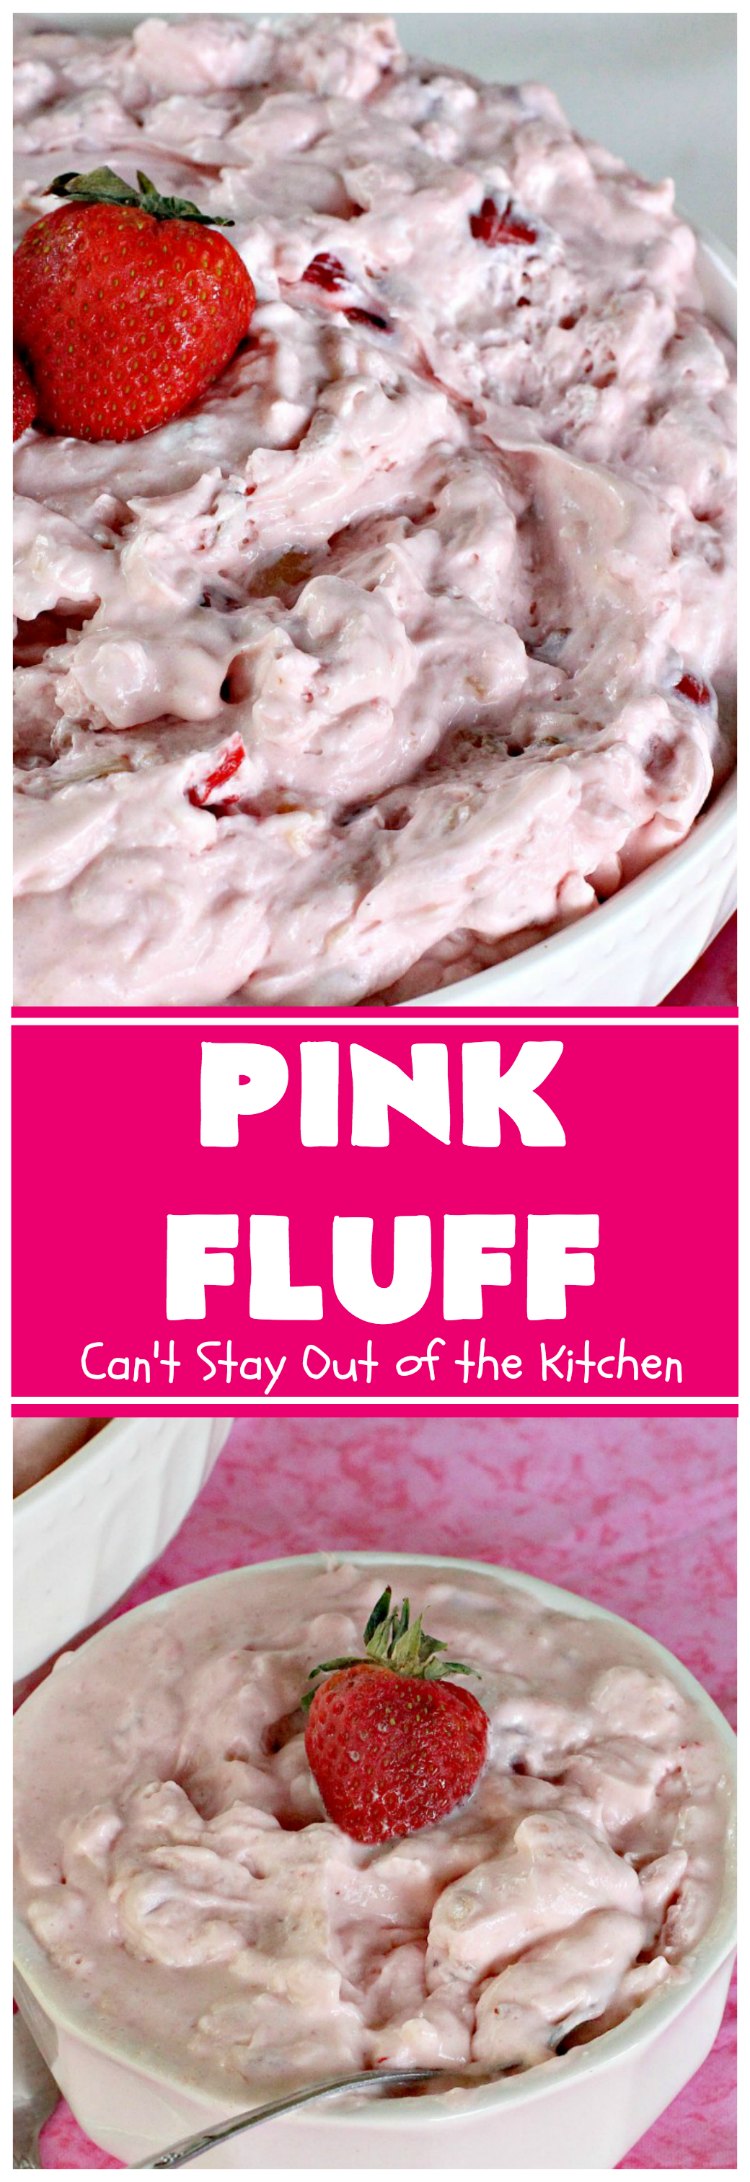 Pink Fluff | Can't Stay Out of the Kitchen | the most divine #fruit #salad ever! It's almost like eating #dessert. This is also incredibly easy to make since it uses only 5 ingredients. #pineapple #cherrypiefilling #glutenfree